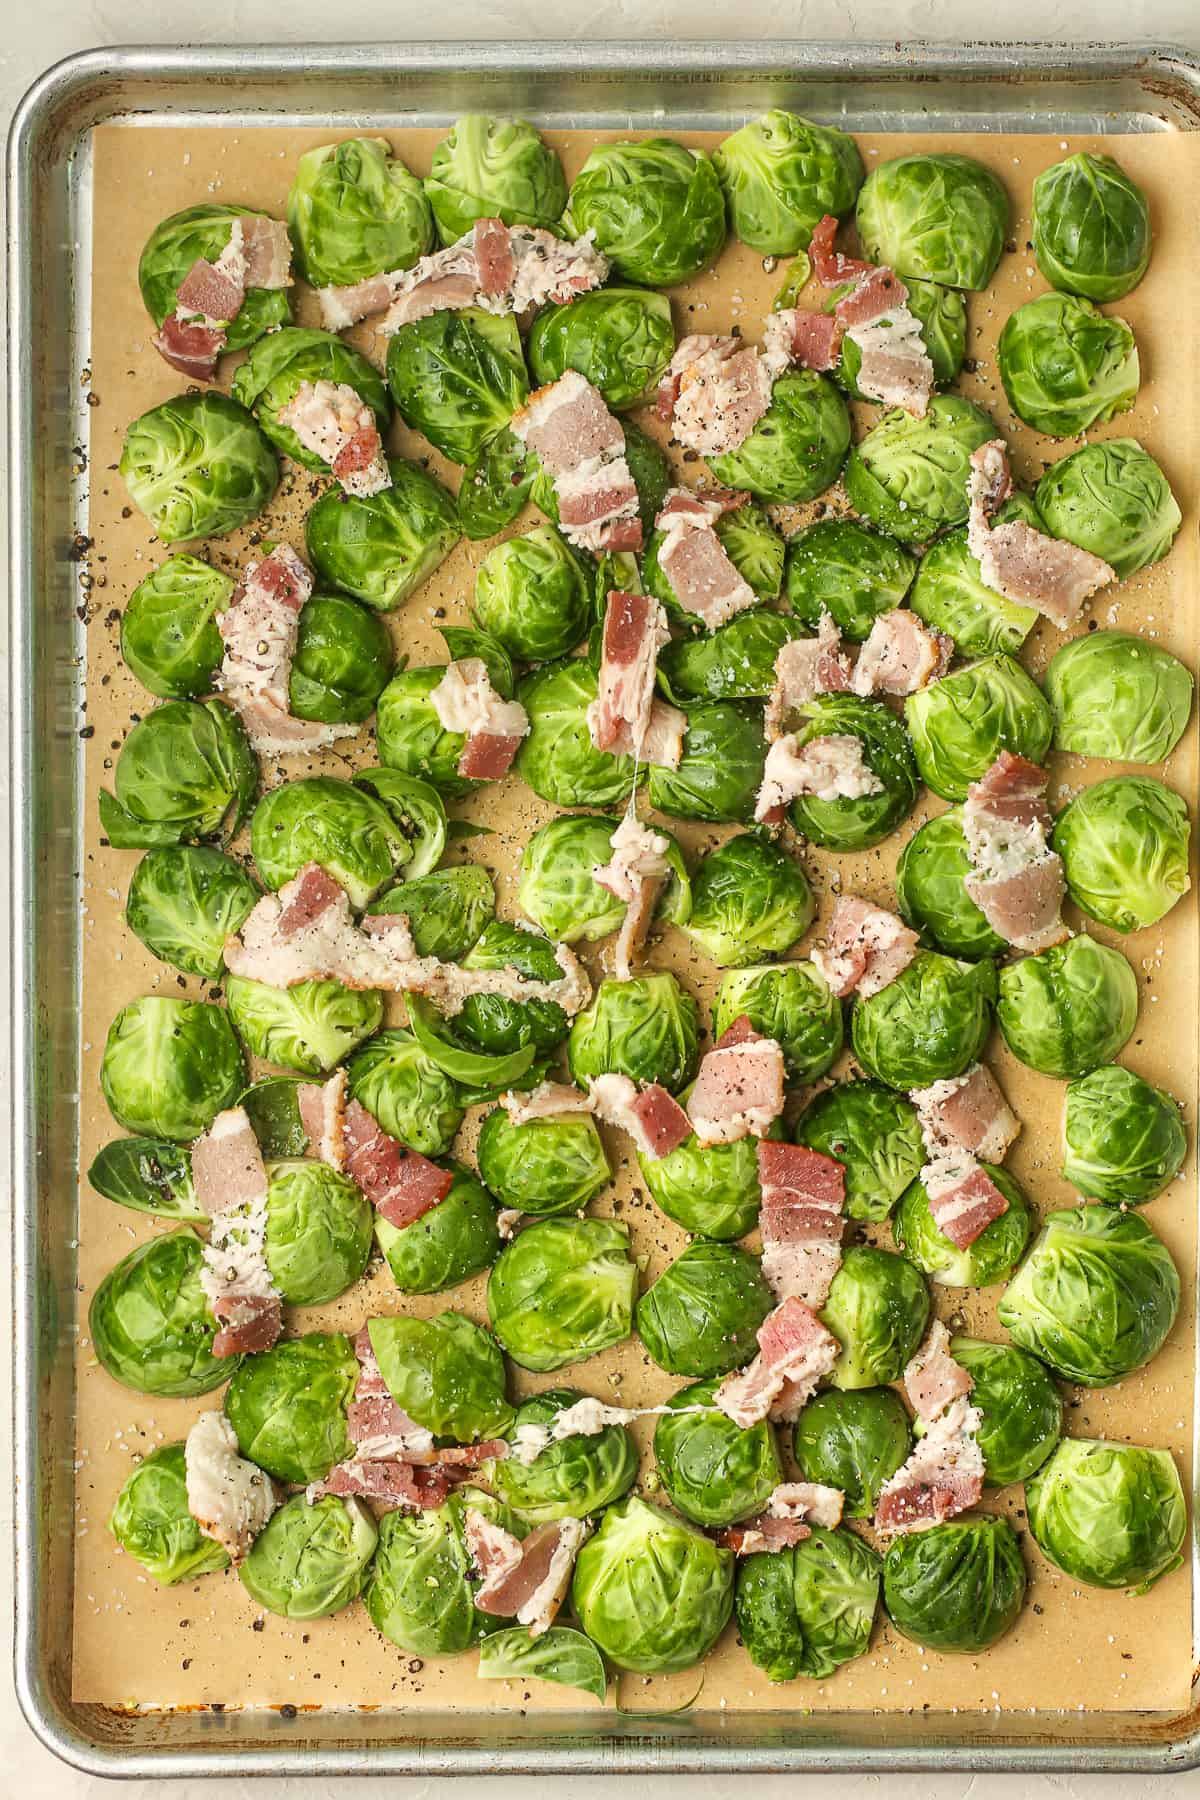 A pan of halved Brussels sprouts and raw bacon before roasting.